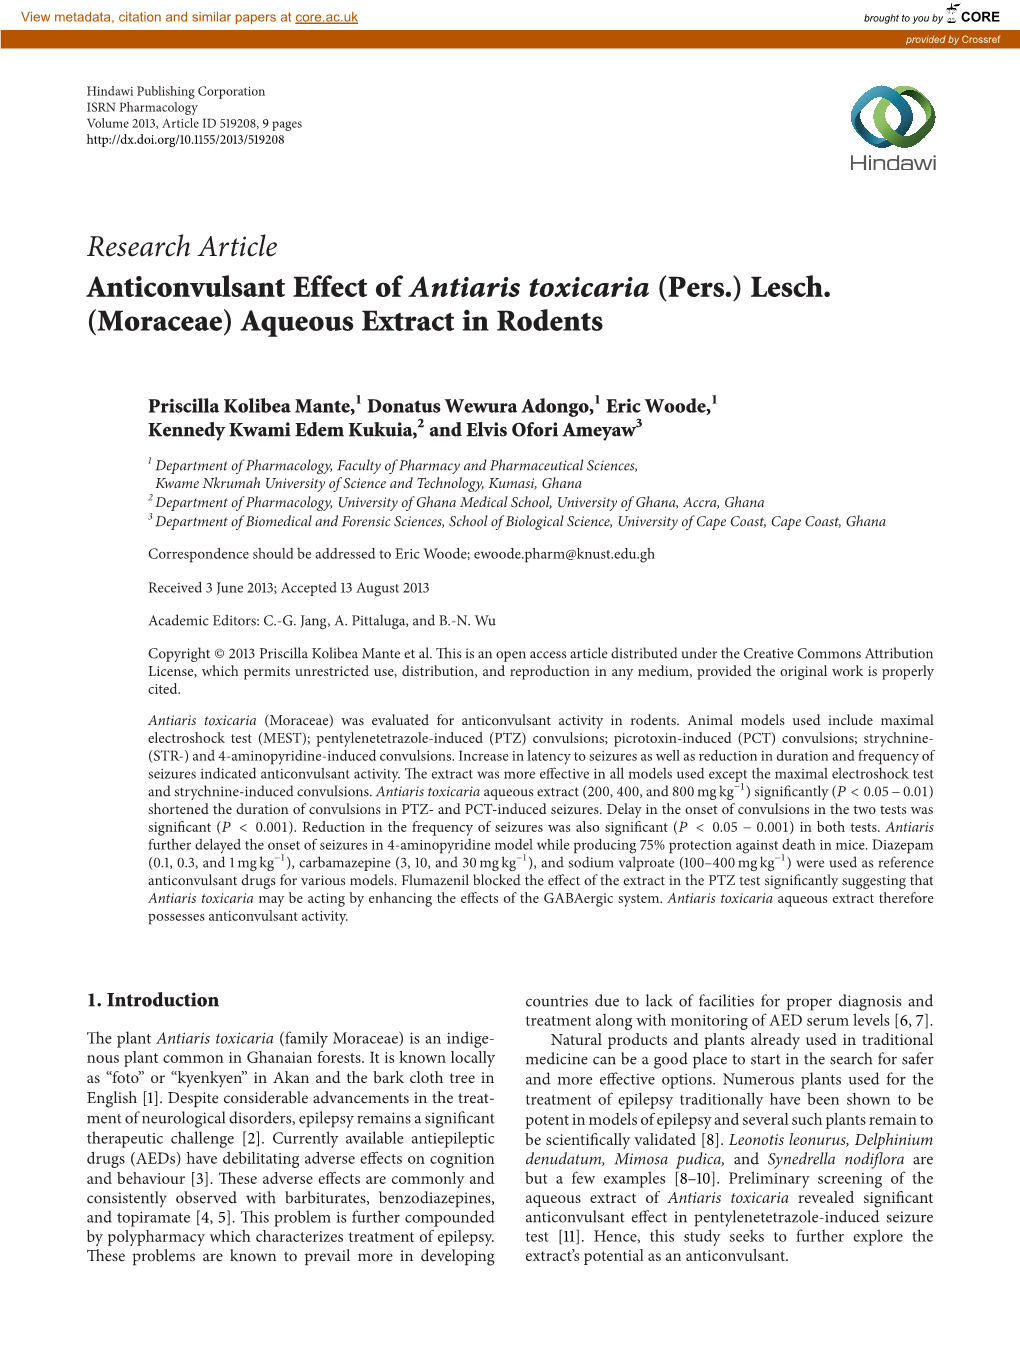 Research Article Anticonvulsant Effect of Antiaris Toxicaria (Pers.) Lesch